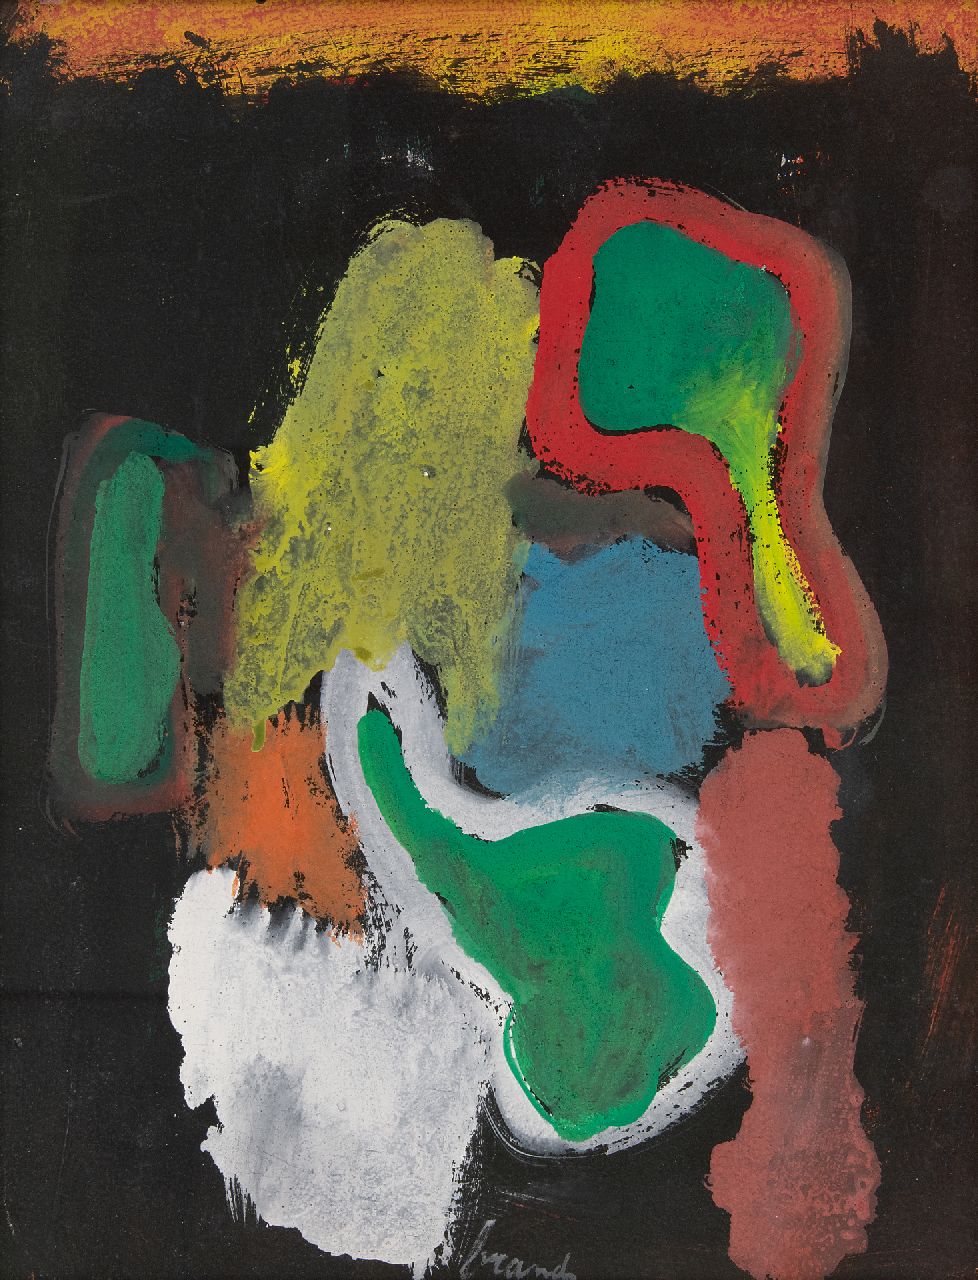 Brands E.A.M.  | Eugenius Antonius Maria 'Eugène' Brands | Watercolours and drawings offered for sale | Composition against a black background, gouache on paper 38.0 x 30.0 cm, signed l.c. and dated on the reverse 1.8.1968